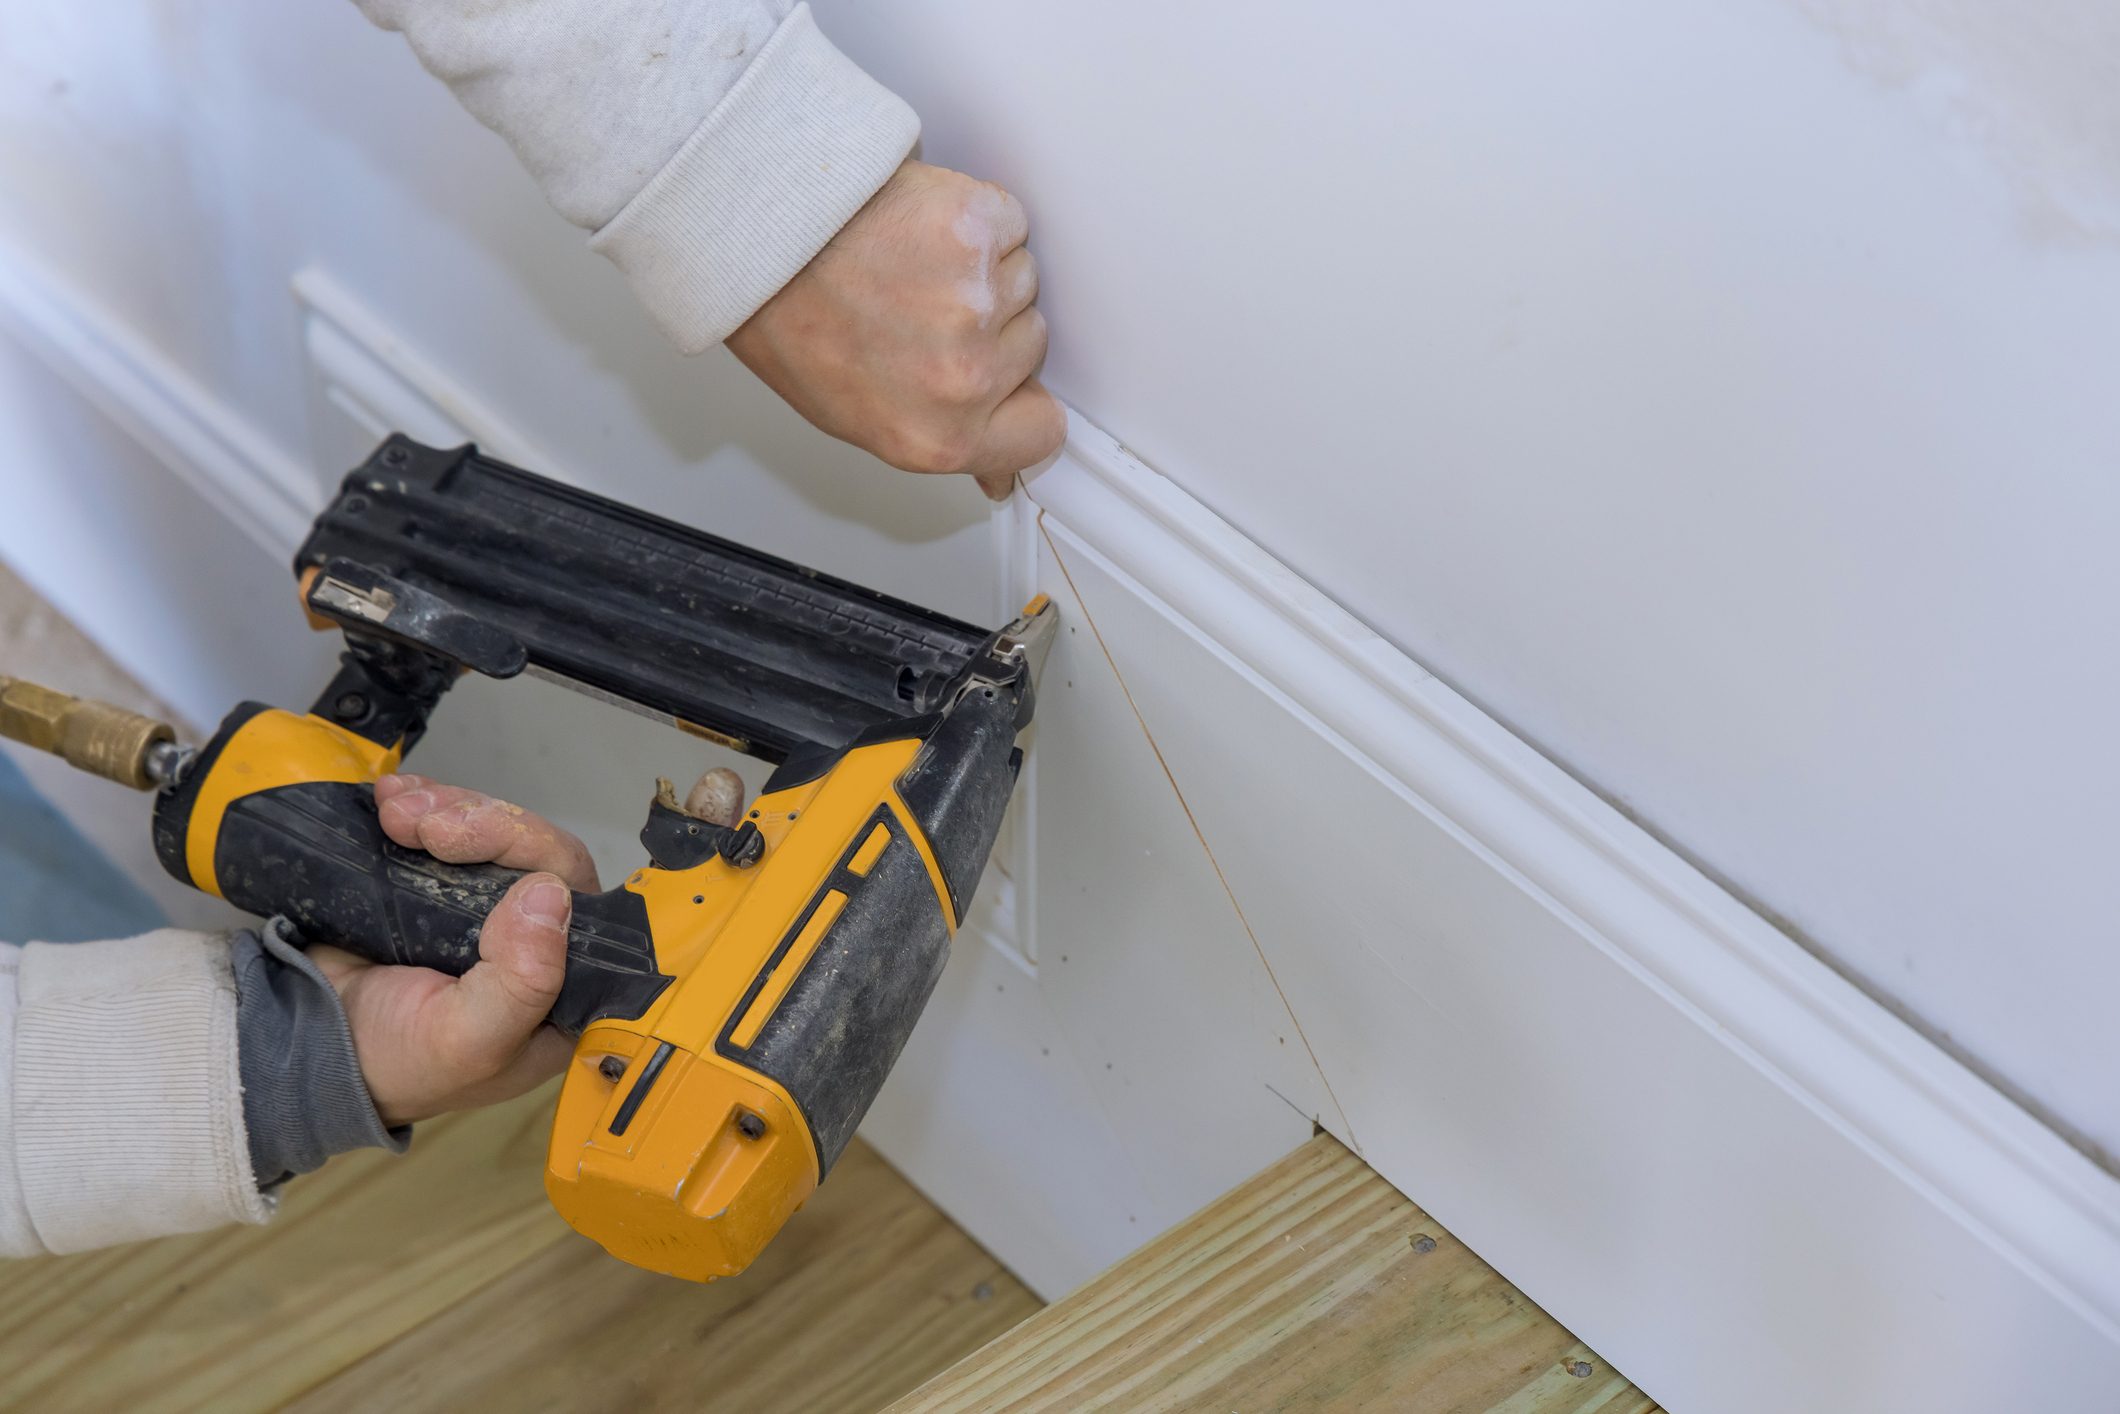 The carpenter uses a brad nail gun for the purpose of nailing the base molding trim